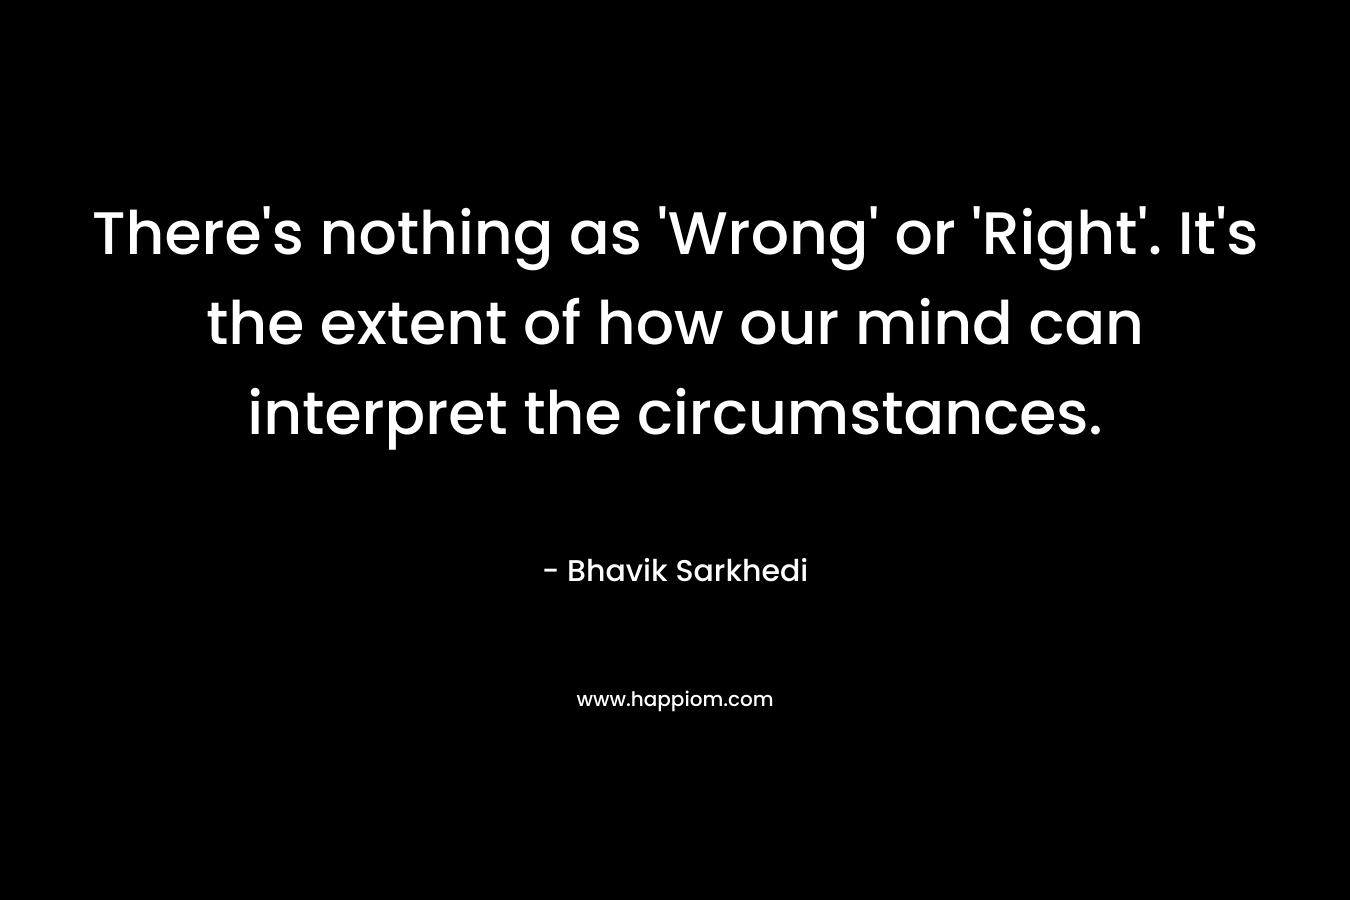 There’s nothing as ‘Wrong’ or ‘Right’. It’s the extent of how our mind can interpret the circumstances. – Bhavik Sarkhedi